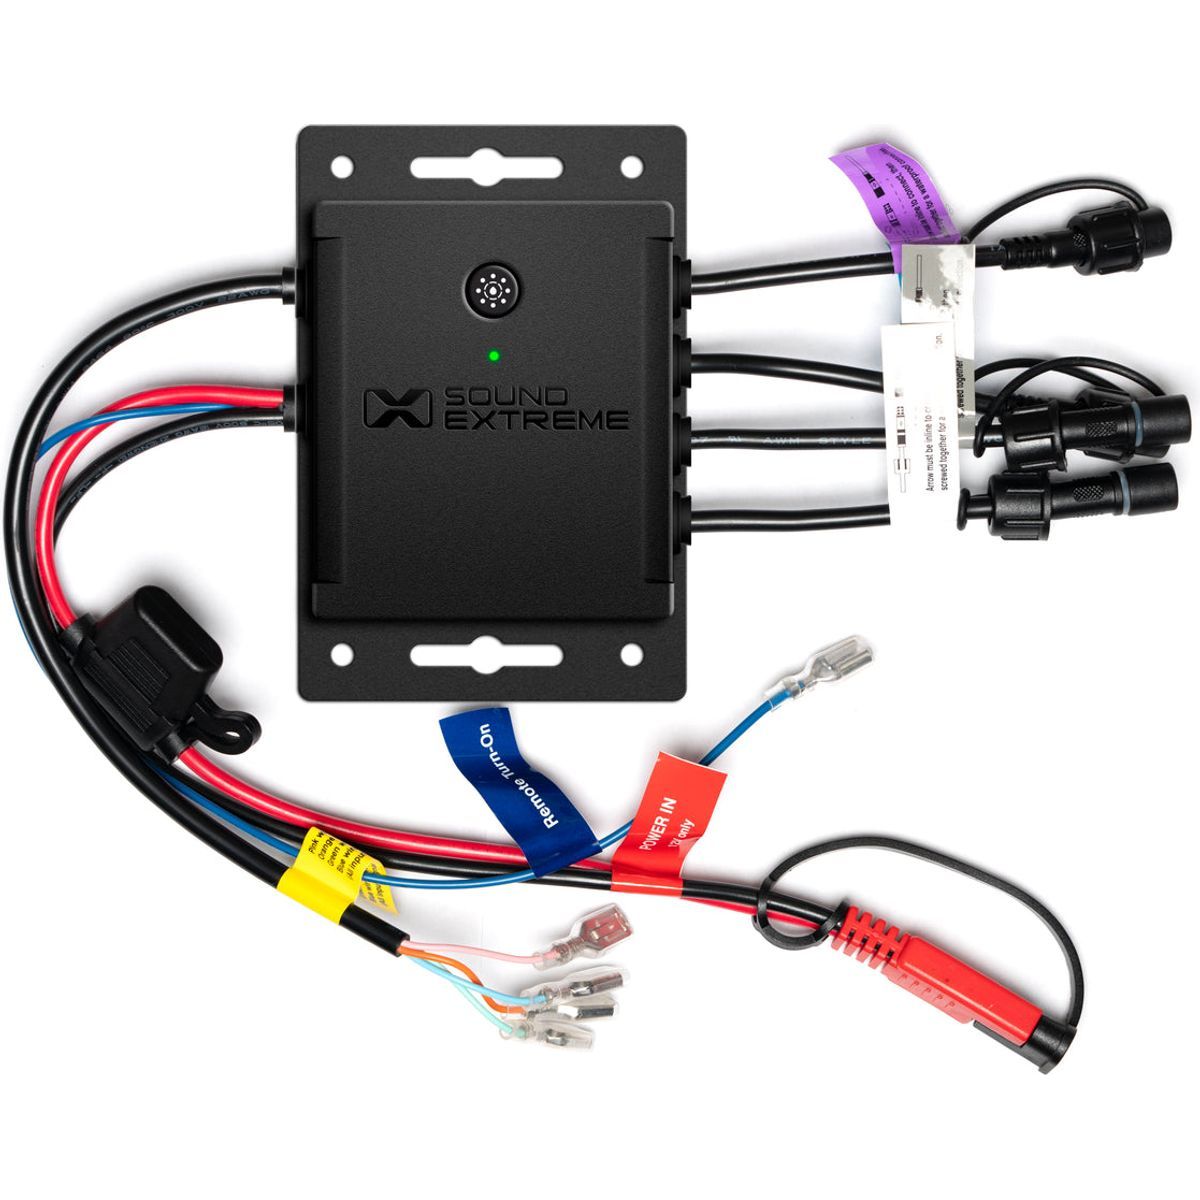 Extreme LED Cast Controller with 4 Zones | ECOXGEAR